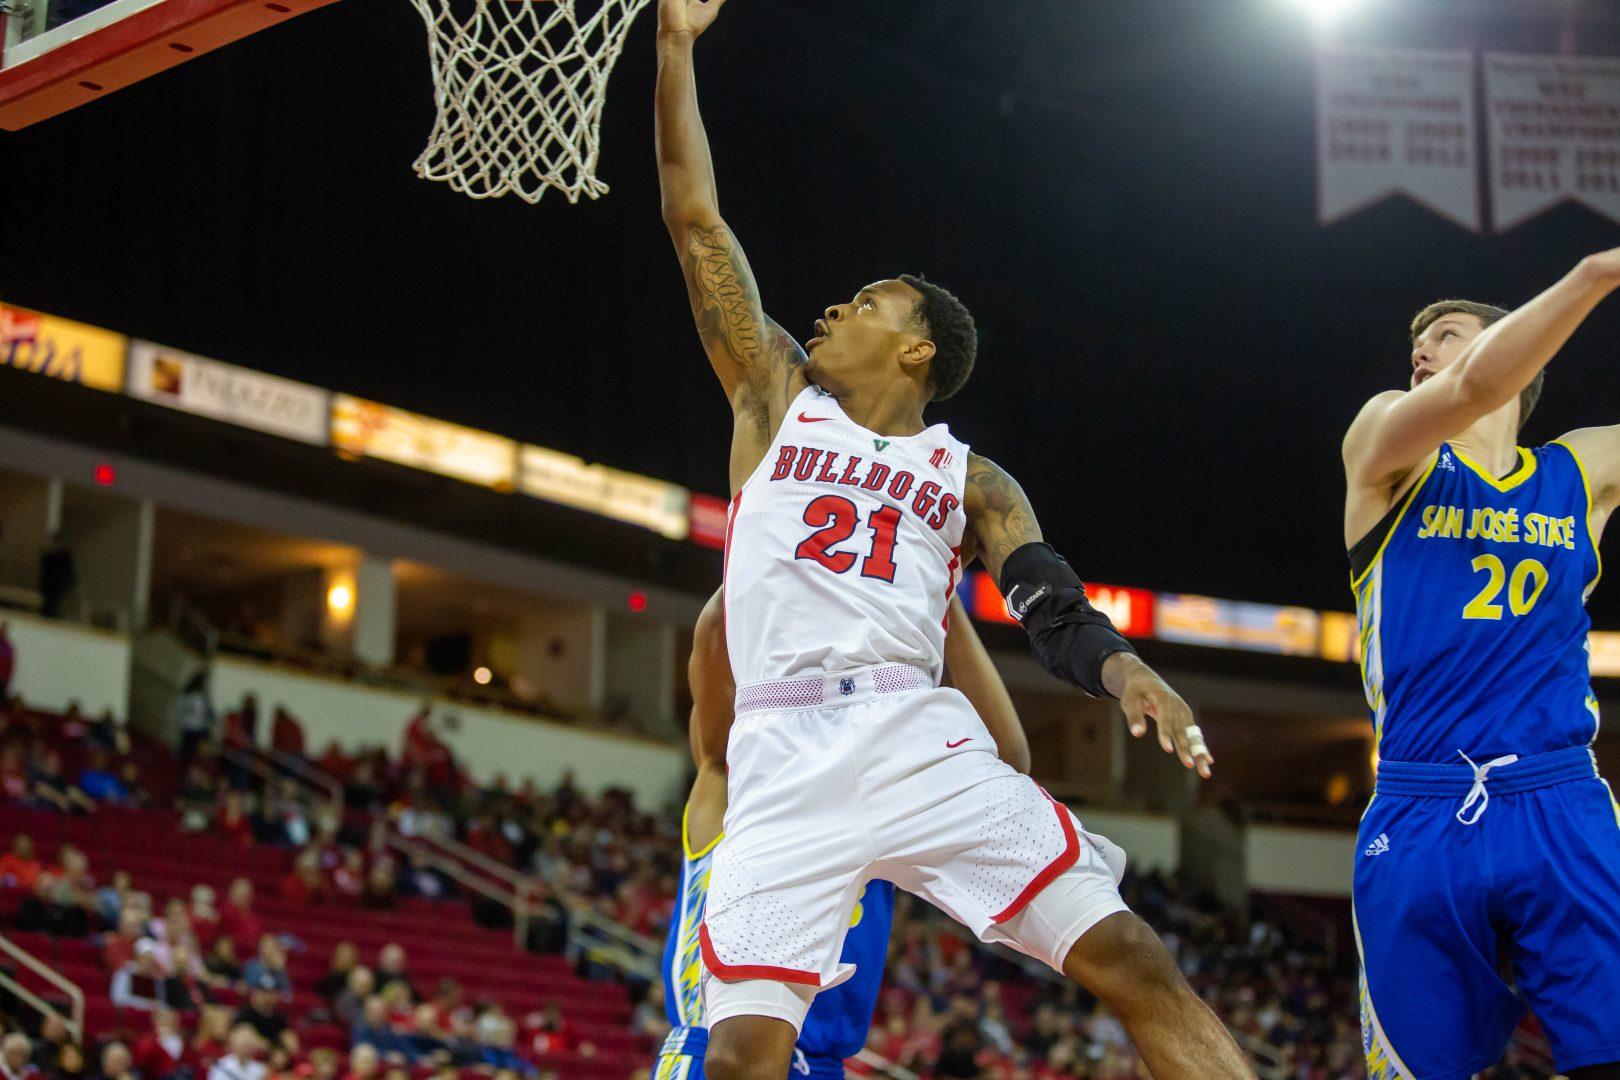 Fresno State guard Deshon Taylor goes up for a layup during the Bulldogs’ 121-81
victory over San Jose State at the Save Mart Center on Saturday, March 9, 2019. (Jose Romo
Jr./The Collegian).